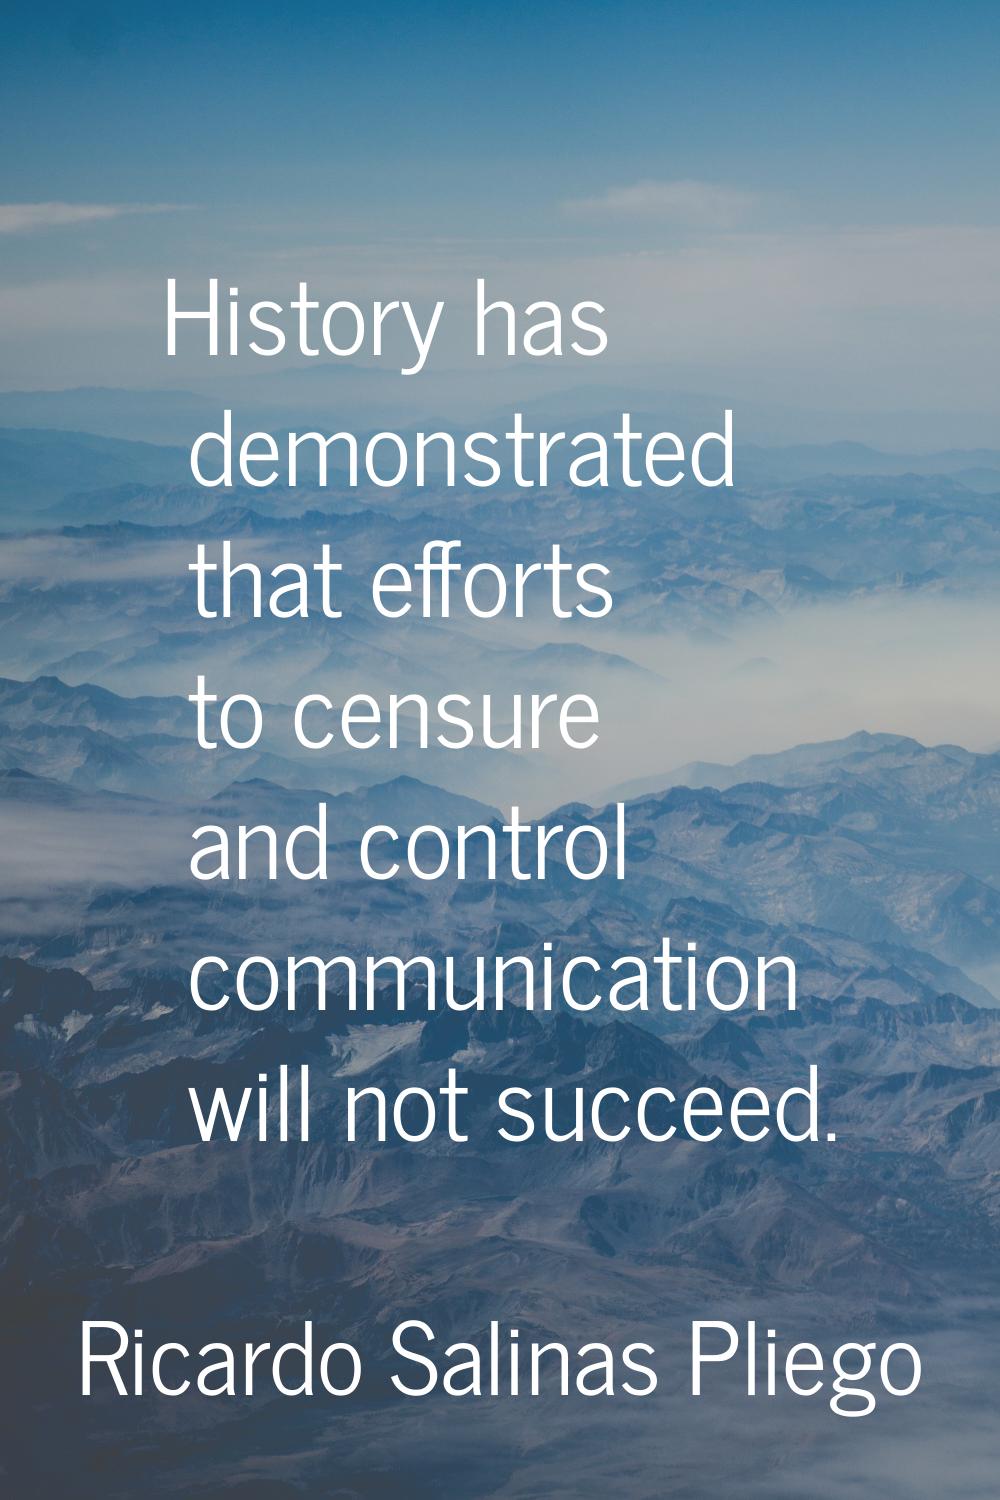 History has demonstrated that efforts to censure and control communication will not succeed.